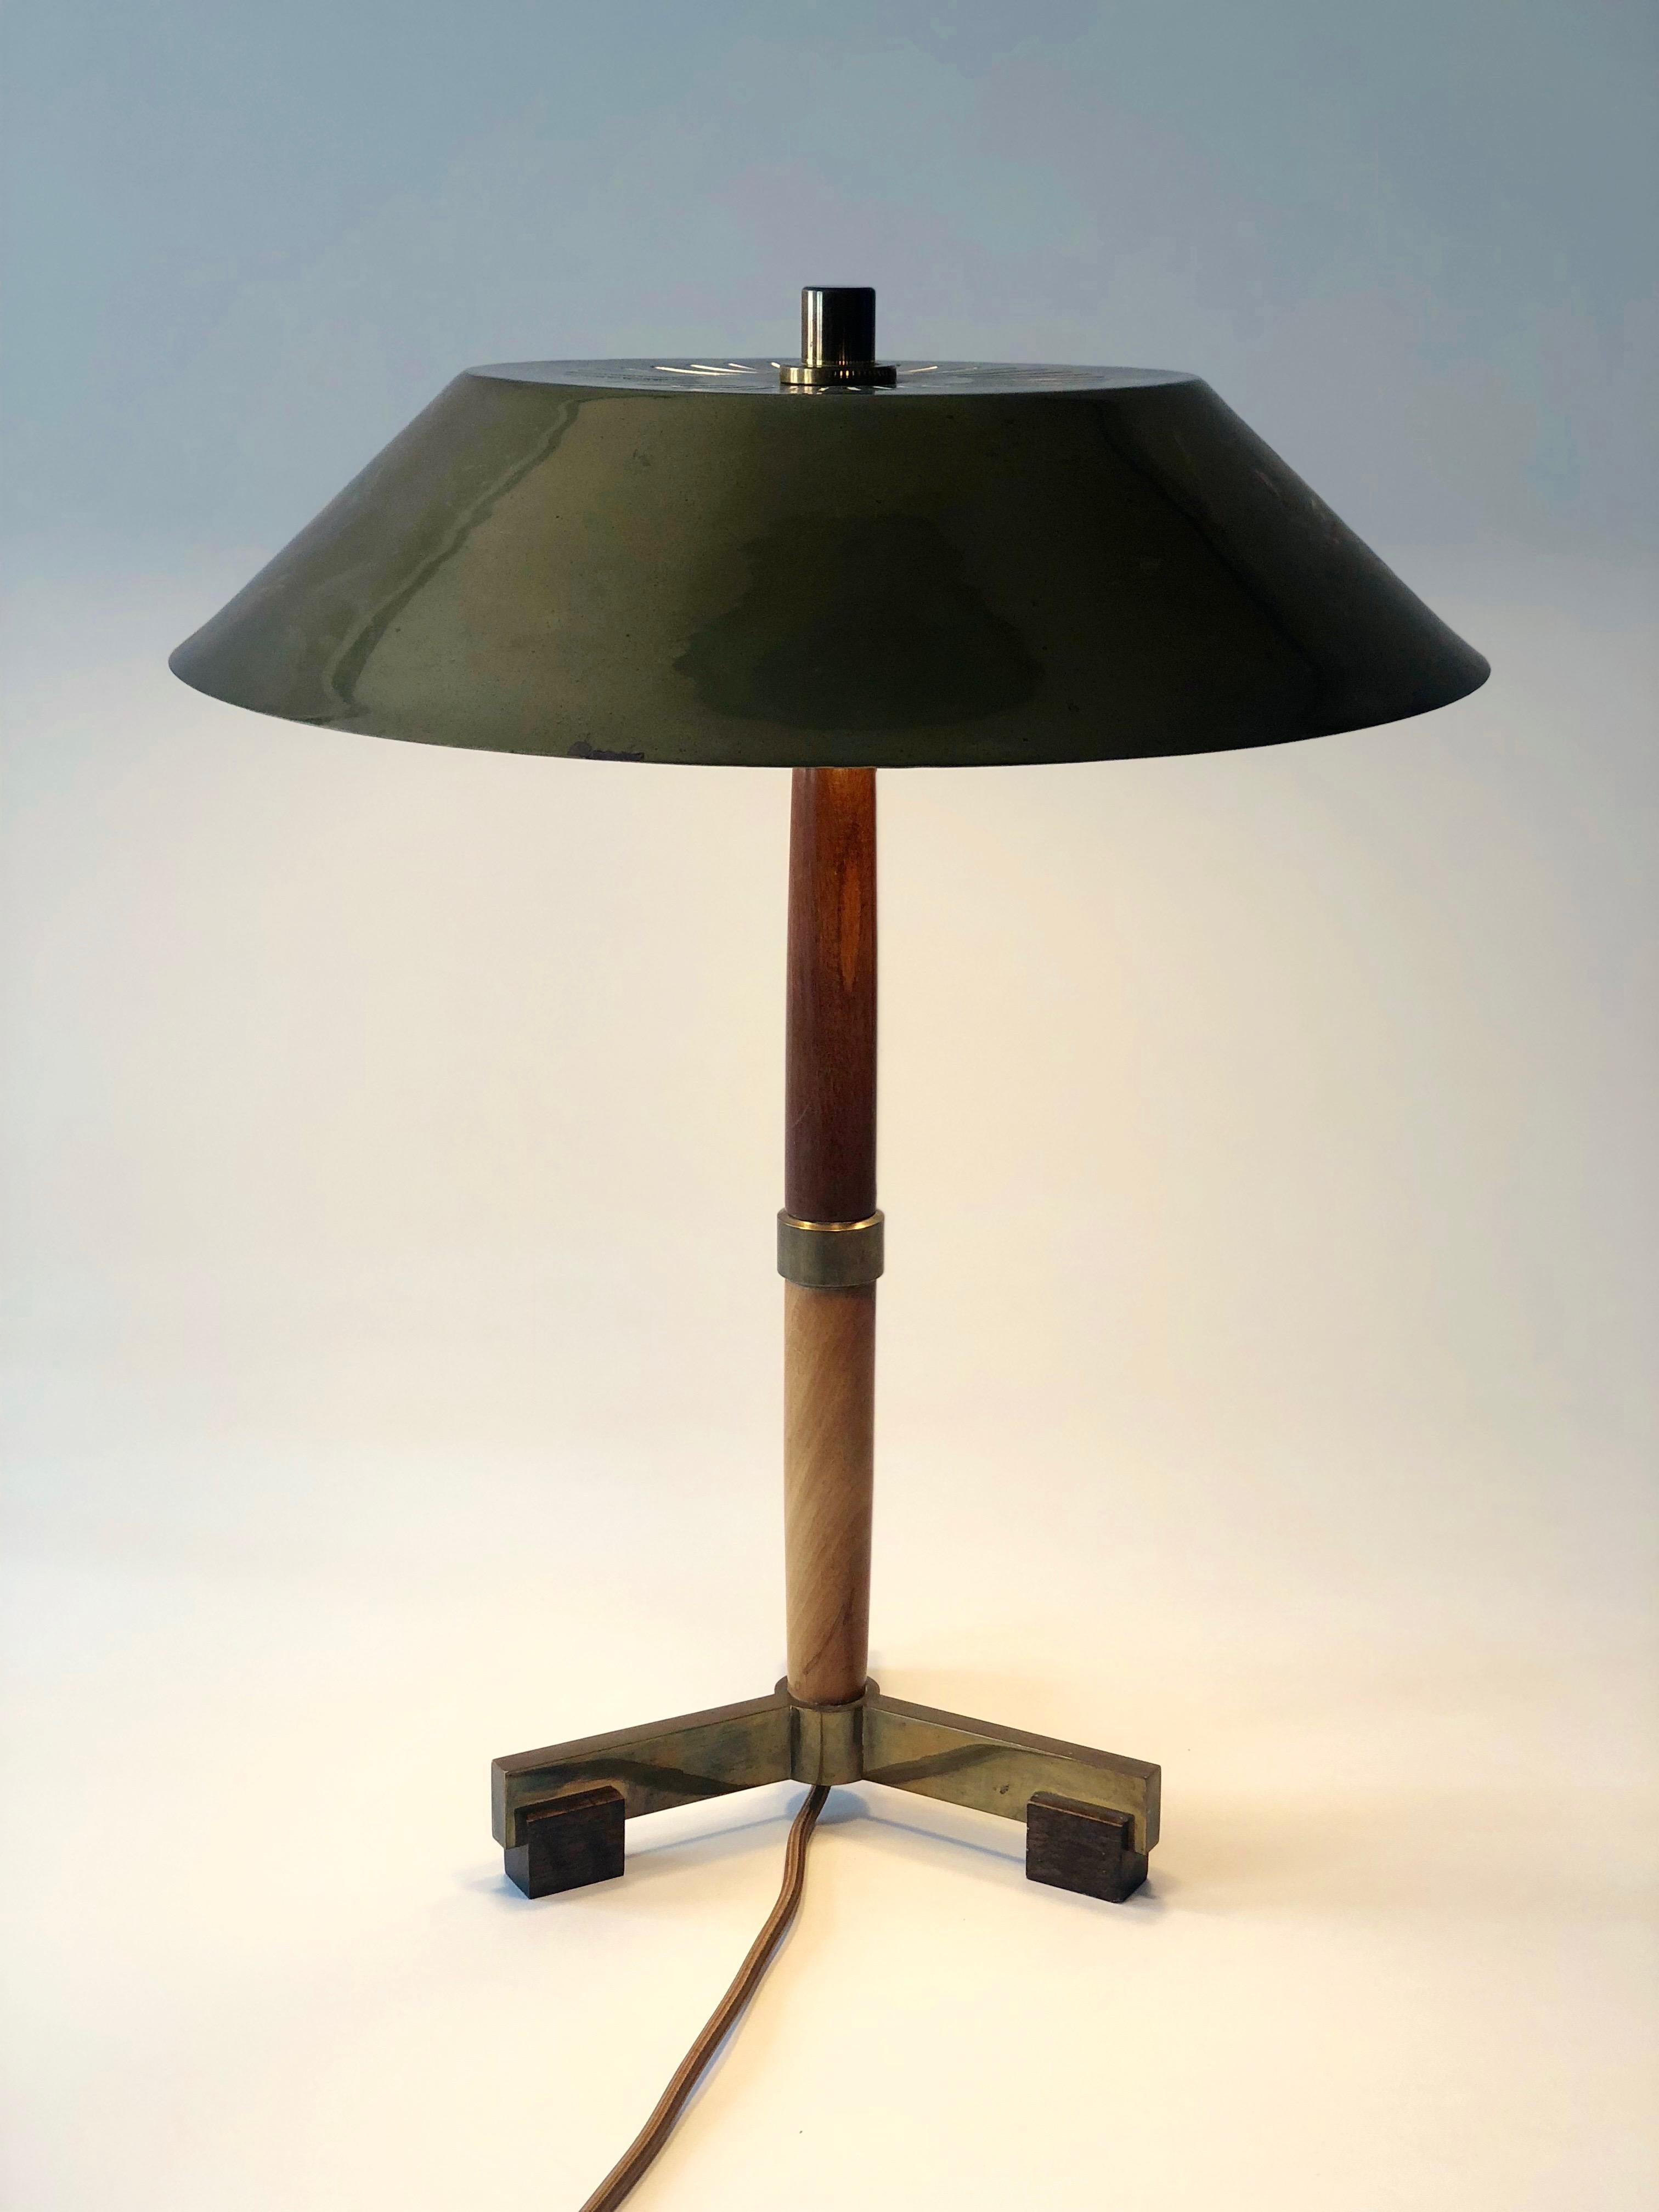 Wood Beautiful Table Lamp from the 1920's, Austria- Czech Republic